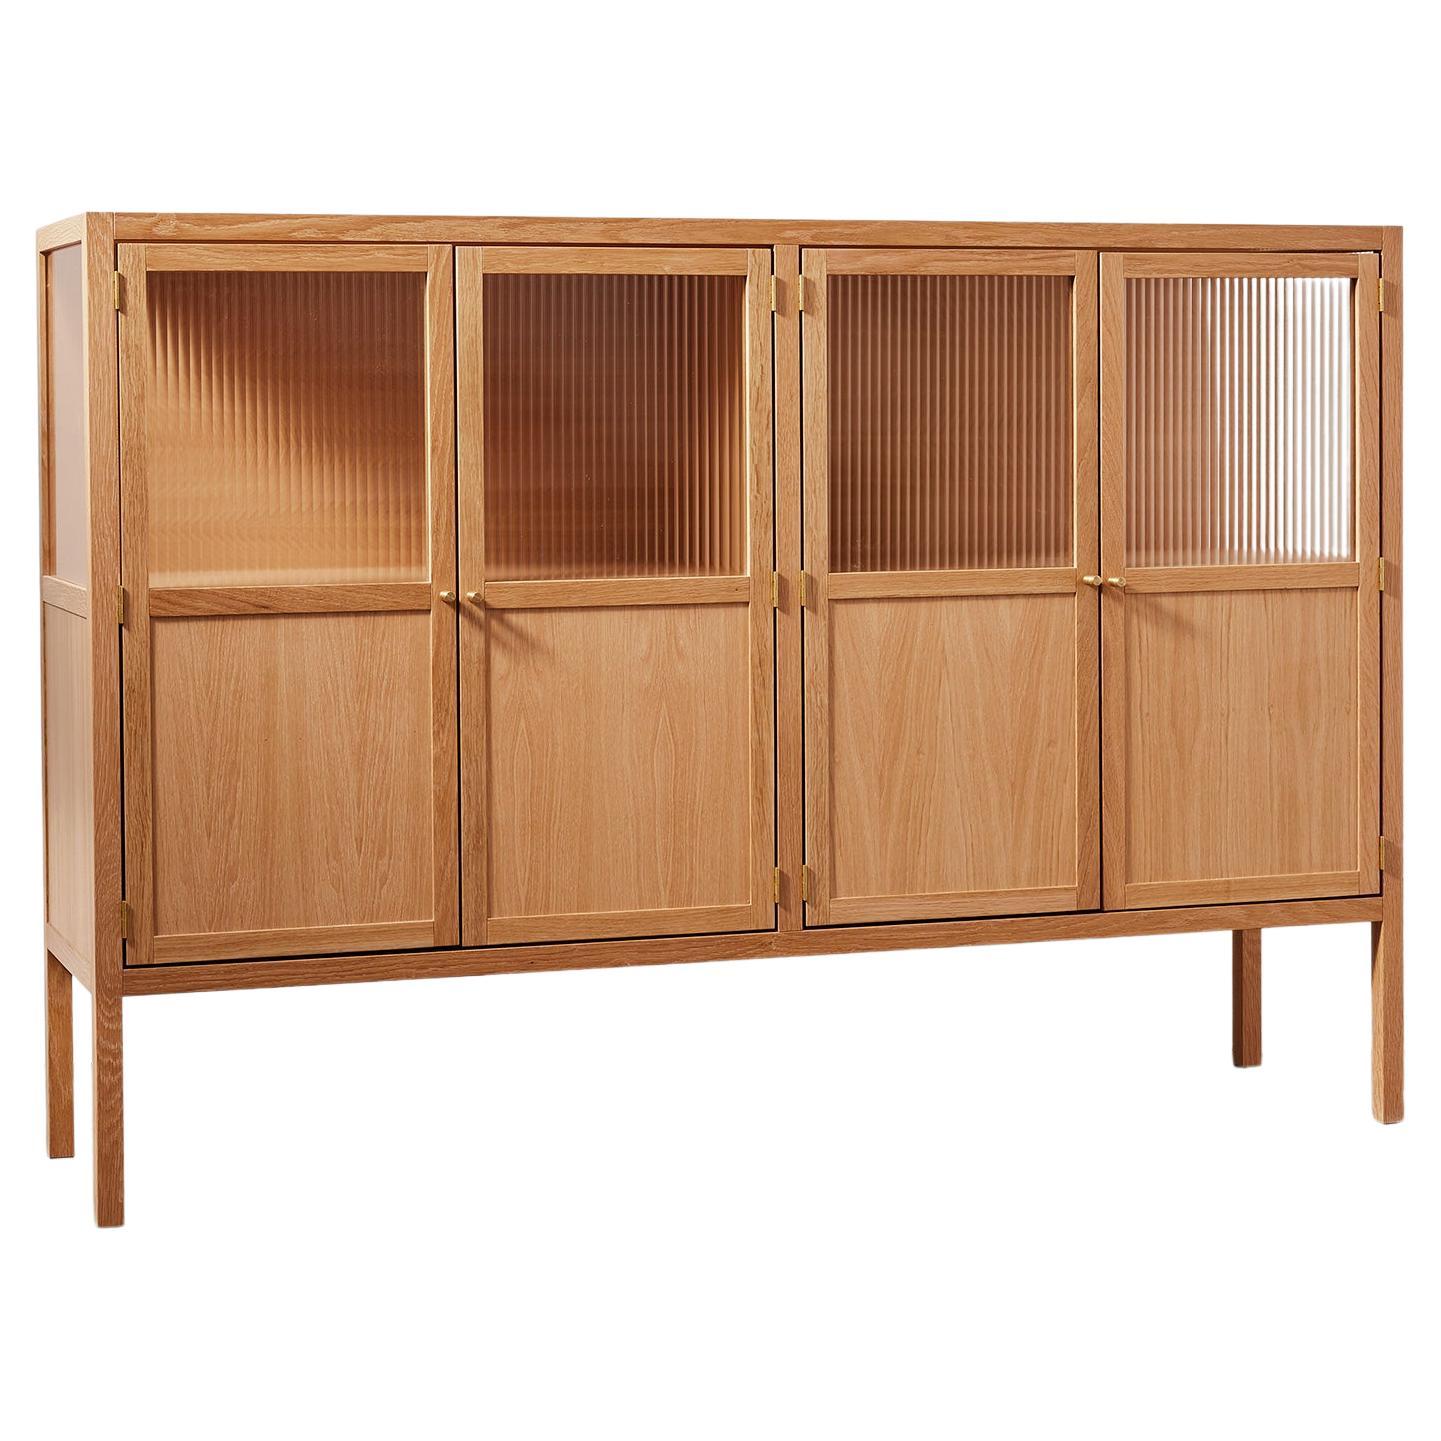 Handmade Alma Credenza - Oak and Reeded Glass - by BACD studio For Sale